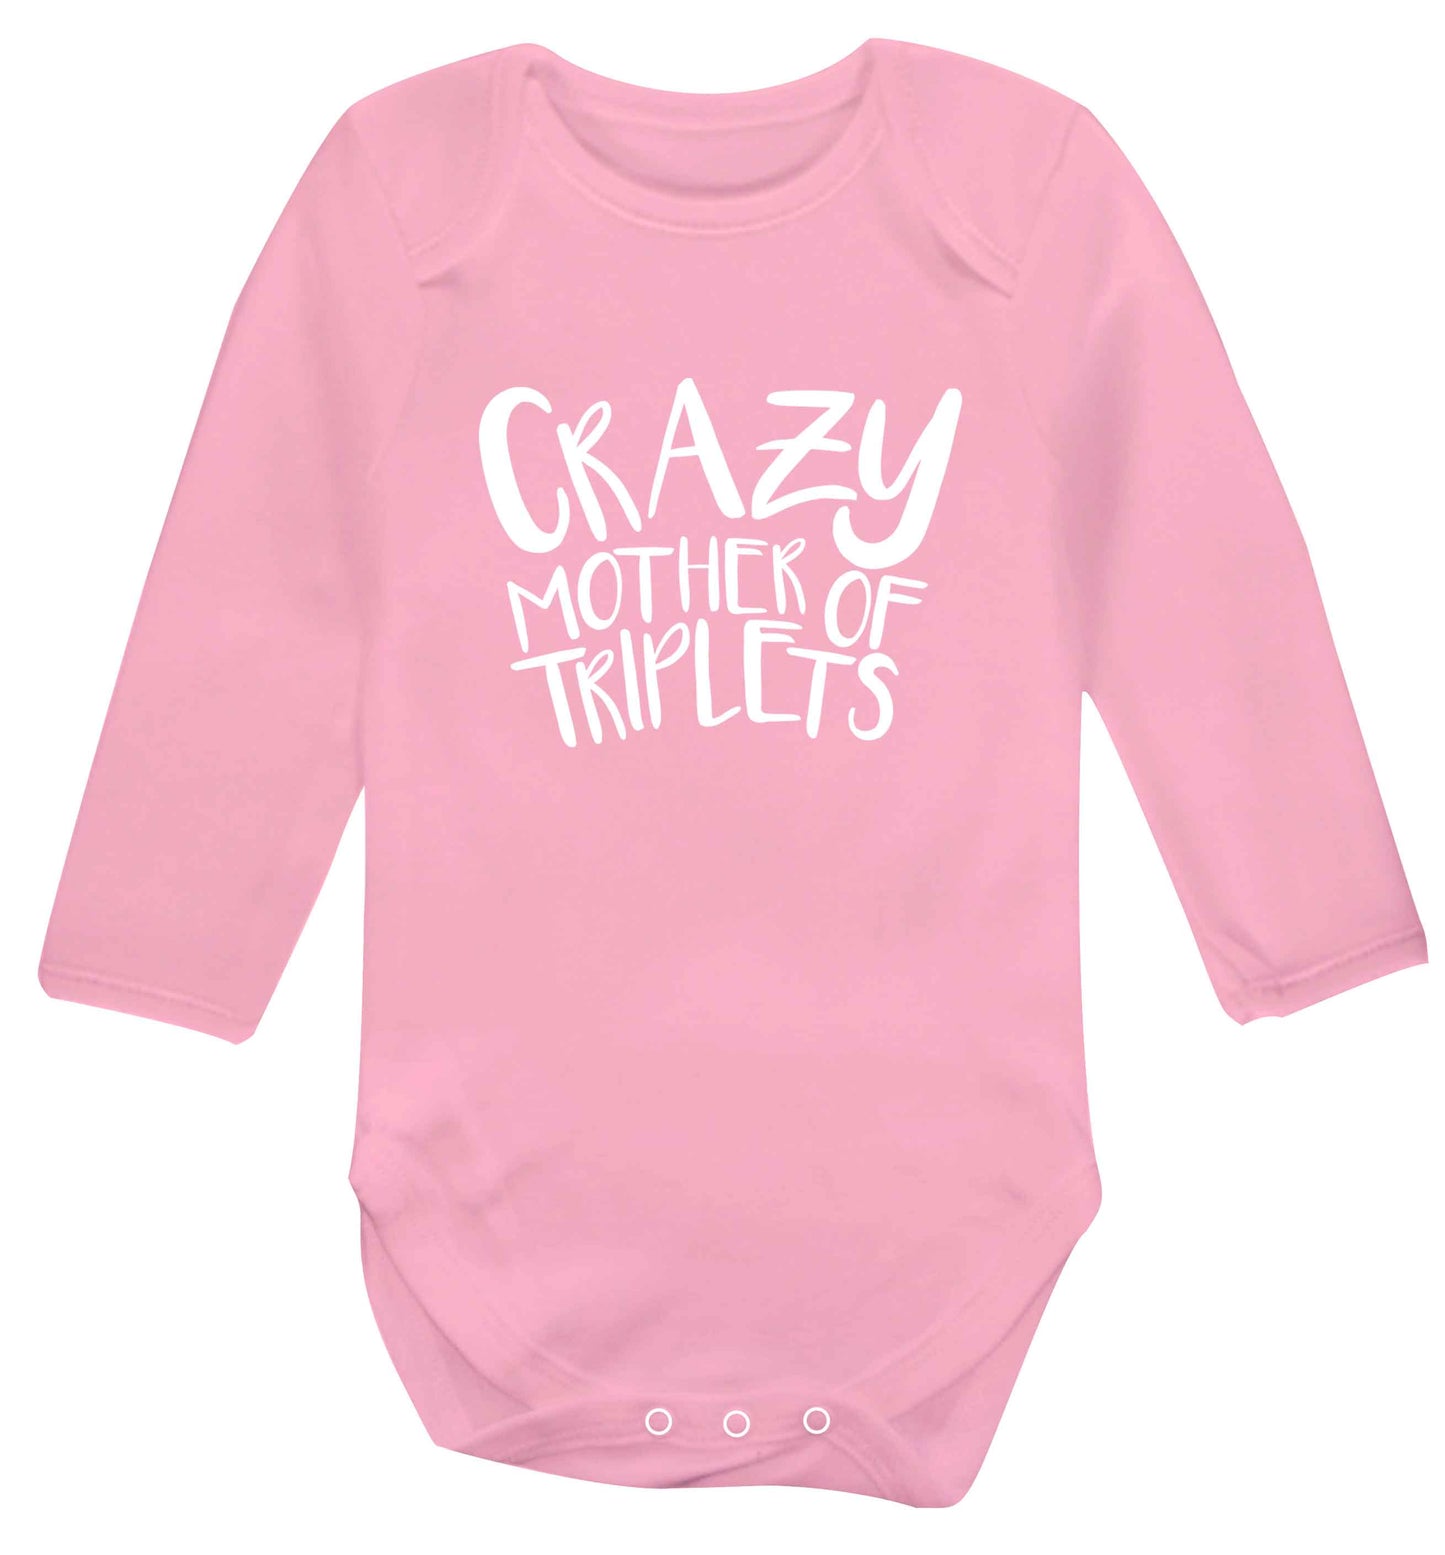 Crazy mother of triplets baby vest long sleeved pale pink 6-12 months